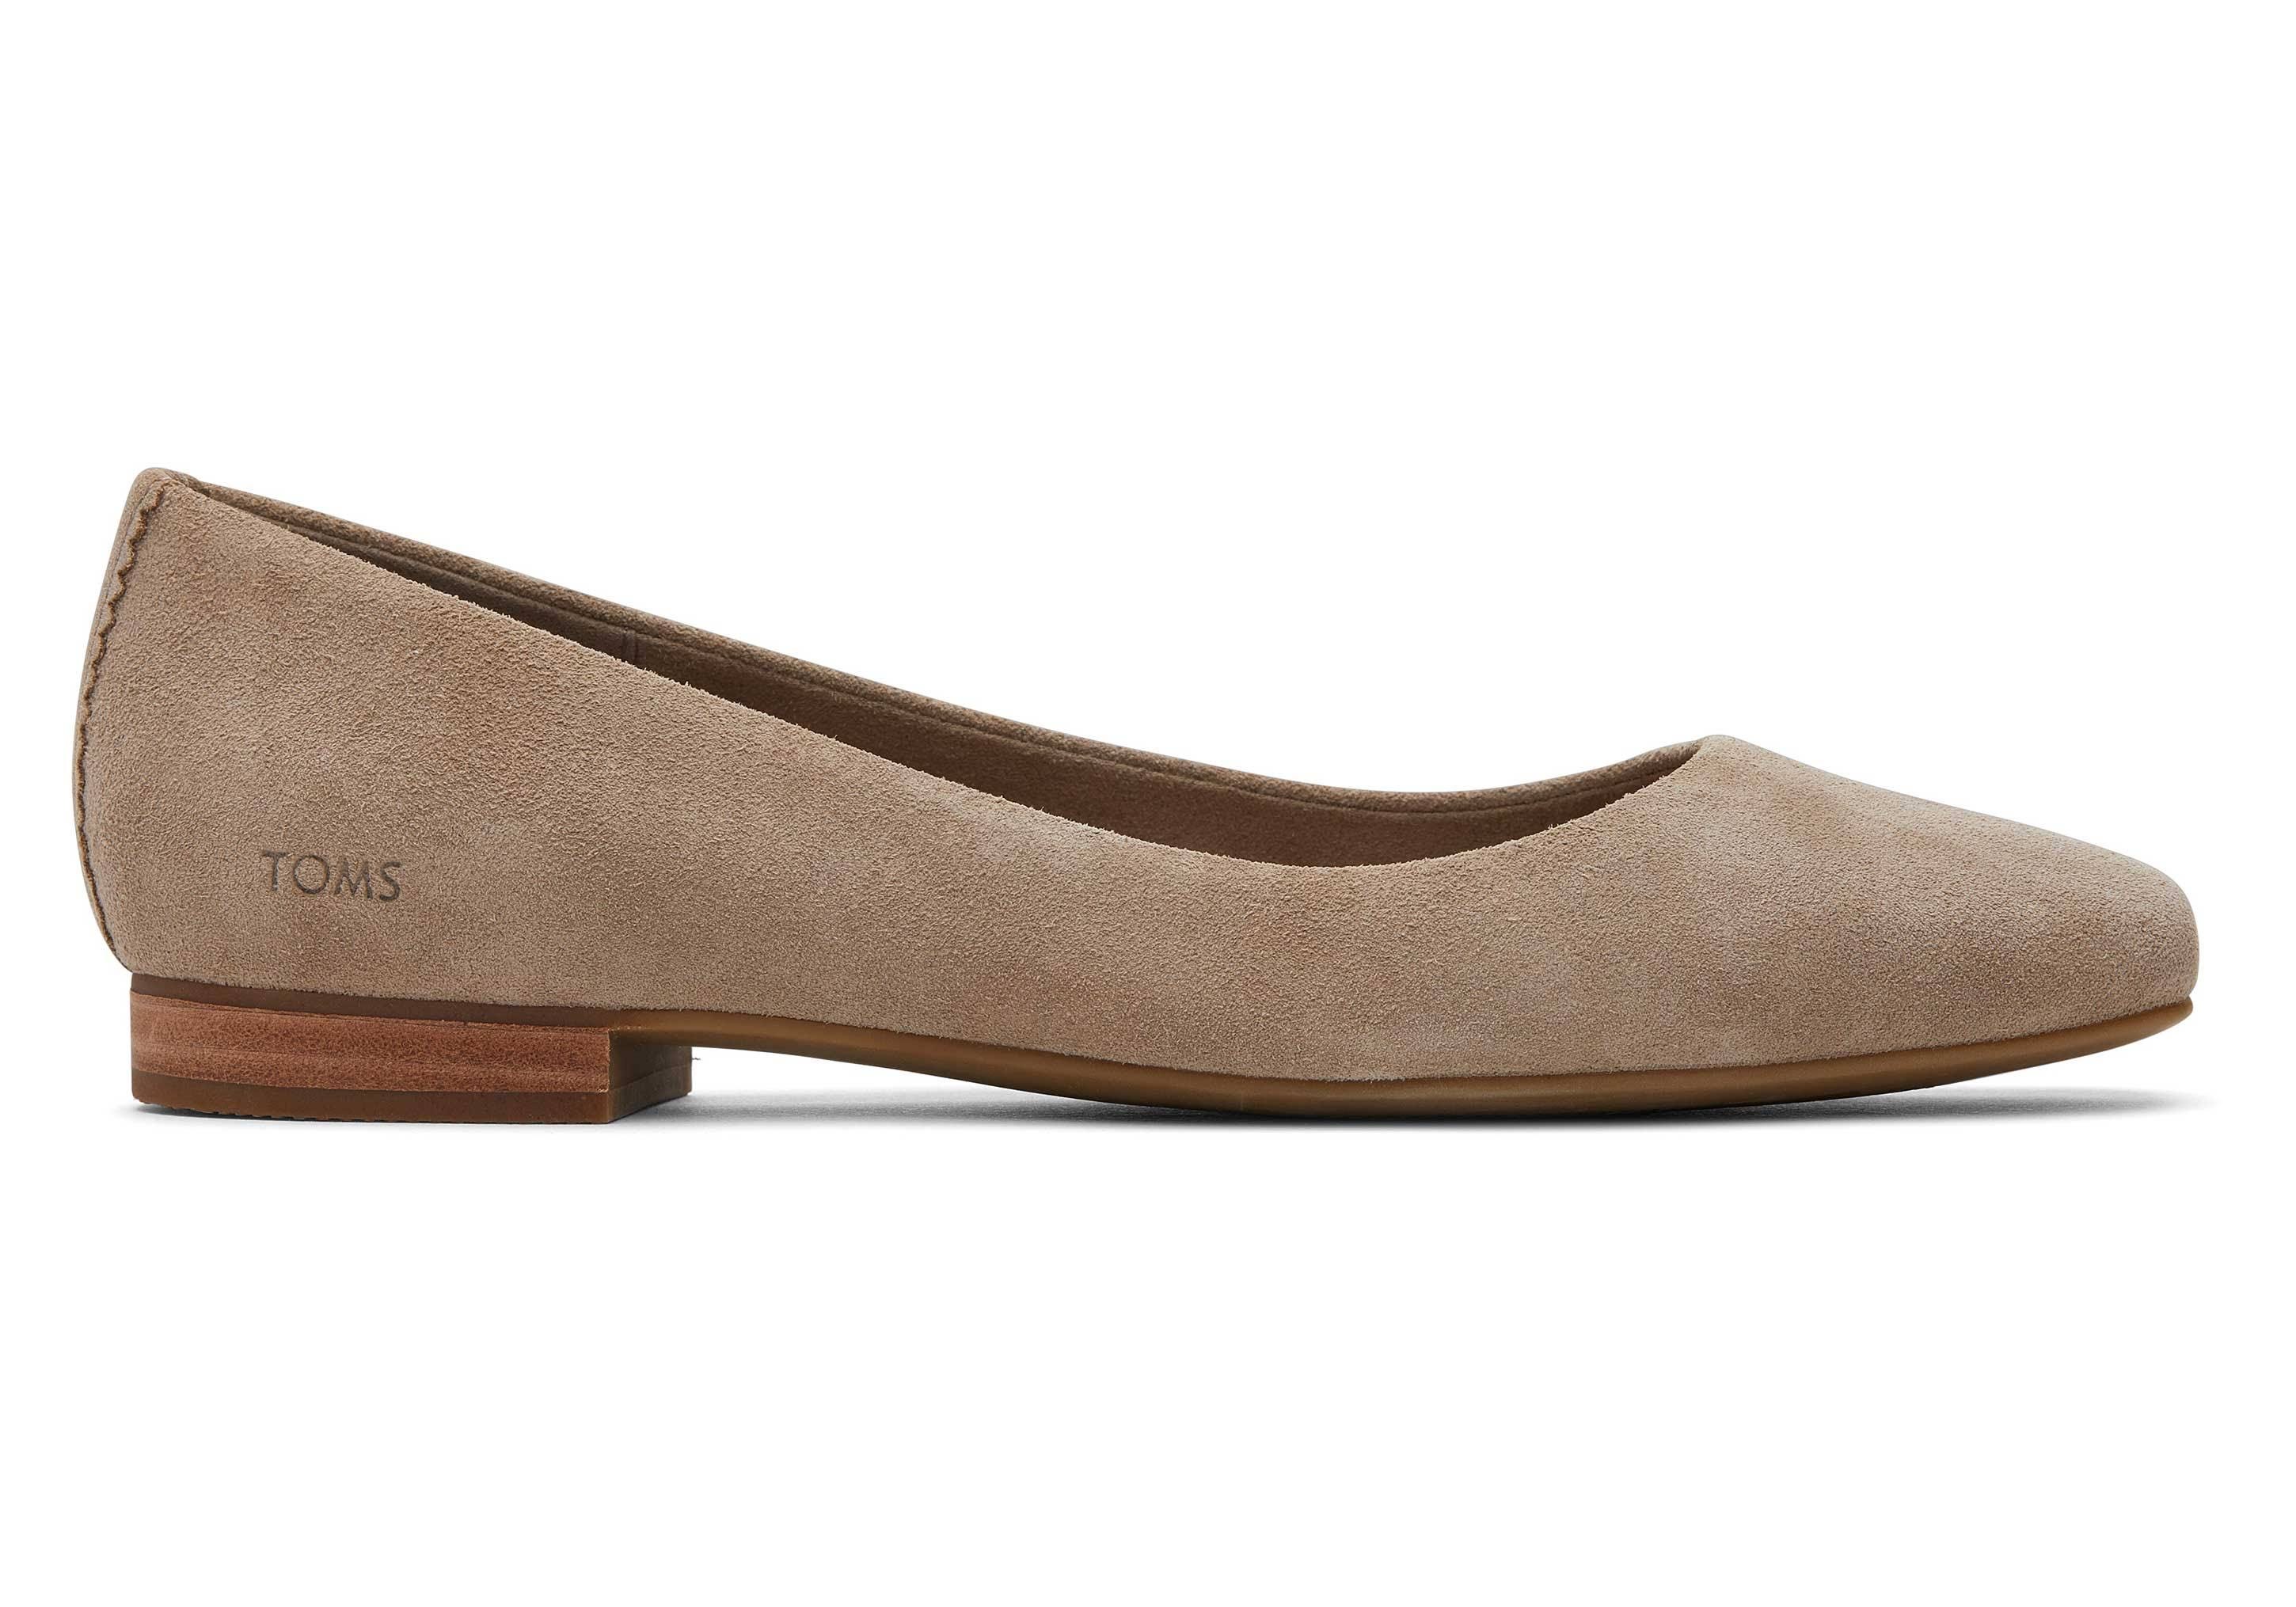 Sleek and Sustainable Cream Flat Shoes: Toms Briella Ballet Flat with OrthoLite Footbed | Image